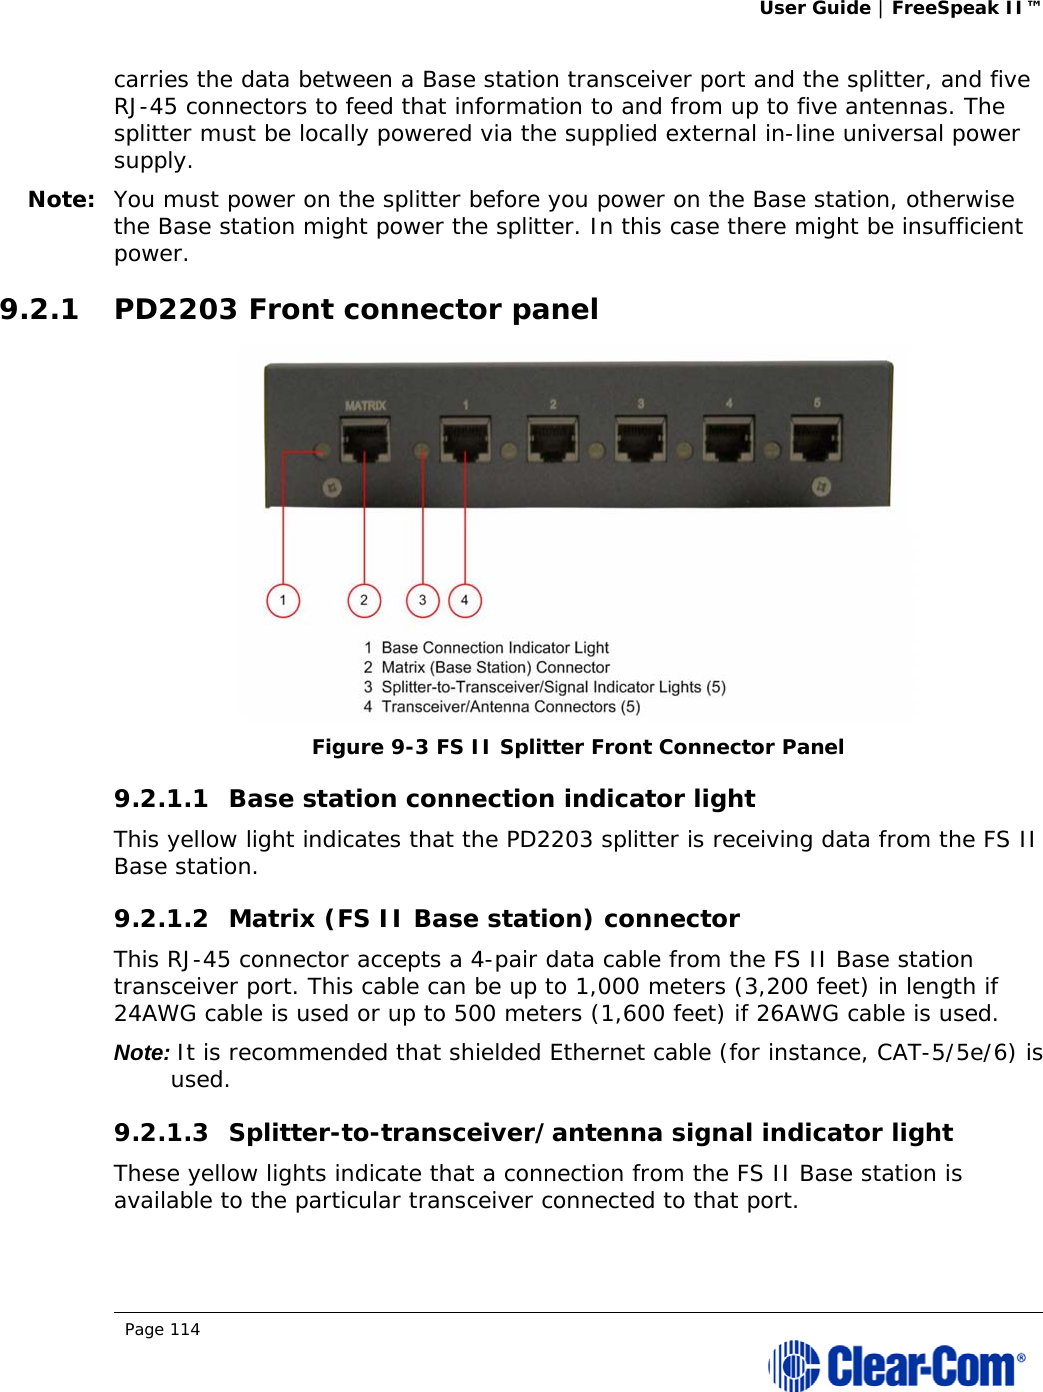 User Guide | FreeSpeak II™  Page 114  carries the data between a Base station transceiver port and the splitter, and five RJ-45 connectors to feed that information to and from up to five antennas. The splitter must be locally powered via the supplied external in-line universal power supply. Note: You must power on the splitter before you power on the Base station, otherwise the Base station might power the splitter. In this case there might be insufficient power. 9.2.1 PD2203 Front connector panel  Figure 9-3 FS II Splitter Front Connector Panel 9.2.1.1 Base station connection indicator light  This yellow light indicates that the PD2203 splitter is receiving data from the FS II Base station. 9.2.1.2 Matrix (FS II Base station) connector  This RJ-45 connector accepts a 4-pair data cable from the FS II Base station transceiver port. This cable can be up to 1,000 meters (3,200 feet) in length if 24AWG cable is used or up to 500 meters (1,600 feet) if 26AWG cable is used. Note: It is recommended that shielded Ethernet cable (for instance, CAT-5/5e/6) is used. 9.2.1.3 Splitter-to-transceiver/antenna signal indicator light  These yellow lights indicate that a connection from the FS II Base station is available to the particular transceiver connected to that port. 